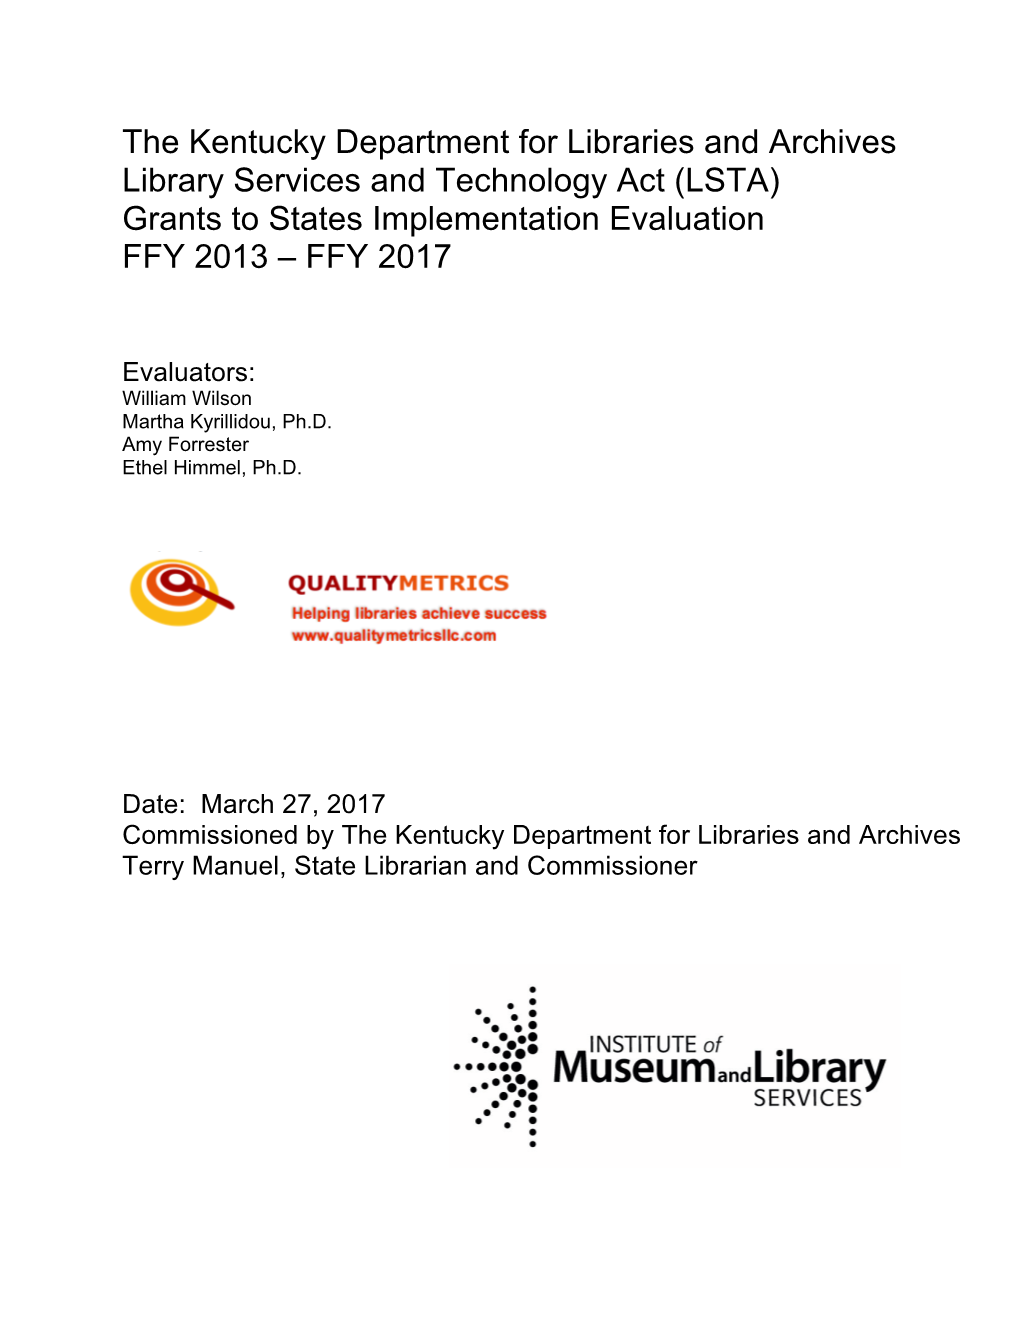 The Kentucky Department for Libraries and Archives Library Services and Technology Act (LSTA) Grants to States Implementation Evaluation FFY 2013 – FFY 2017